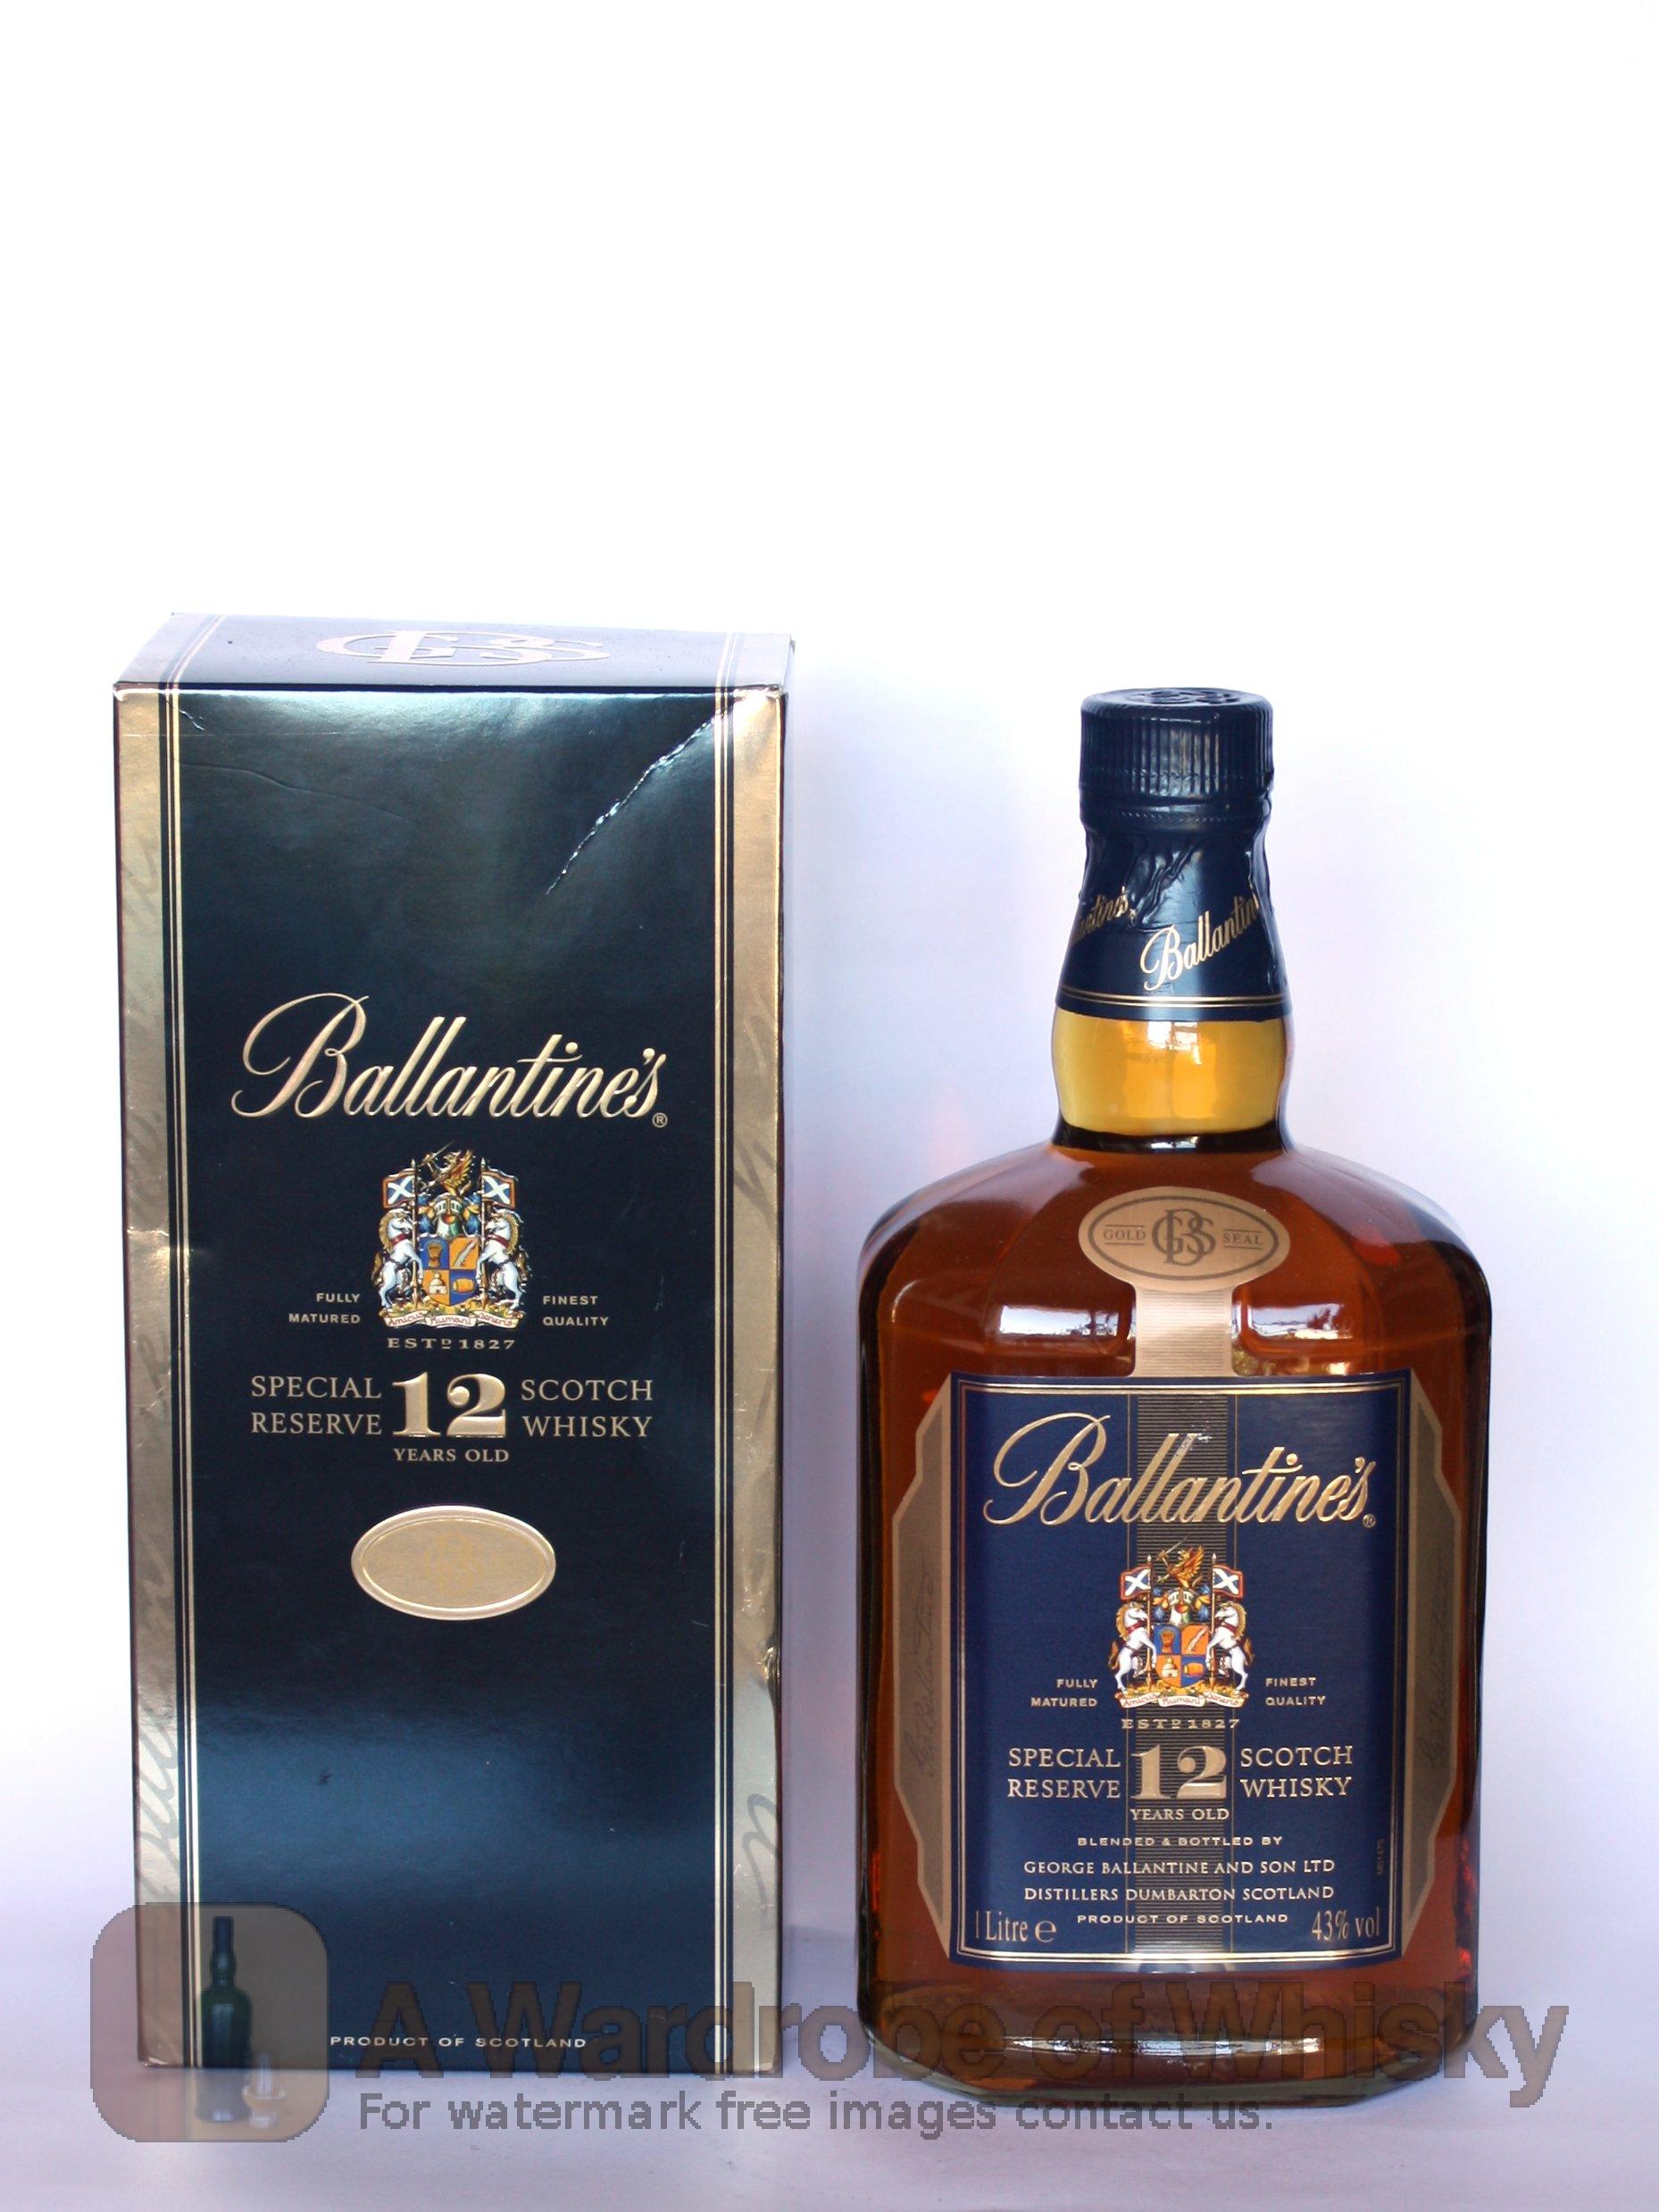 Ballantines 12 Year Old Scotch Whisky –